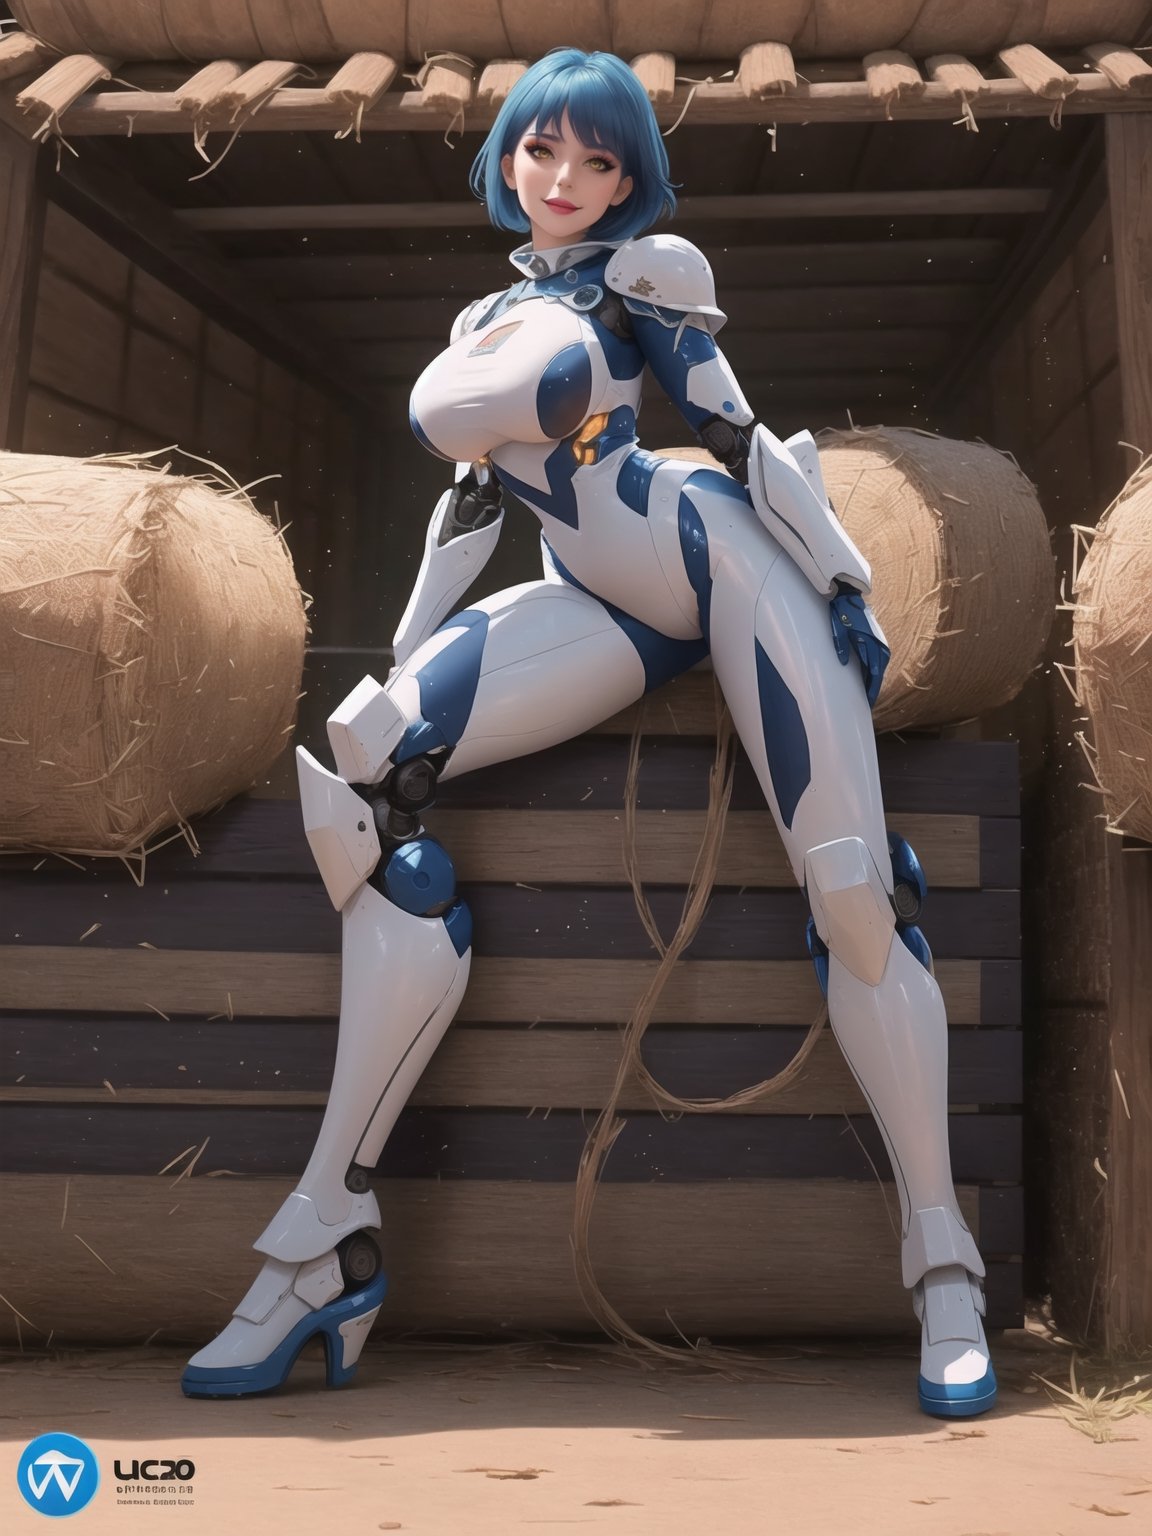 ((A cow woman)), has gigantic breasts, wearing mecha+robotic armor with small blue areas, all white suit, very tight, short hair, blue hair, hair with bangs in front of her eyes, she is in a stable, with large wooden structures, hay bales, machines, warcraft, 16K, UHD, best possible quality, ultra detailed, best possible resolution, ultra technological, futuristic, robotic, Unreal Engine 5, professional photography. She is in a ((sensual pose with interaction and leaning on anything + object + on something + leaning against)) + perfect_thighs, perfect_legs, perfect_feet and ((full body)). More detail and better hands.